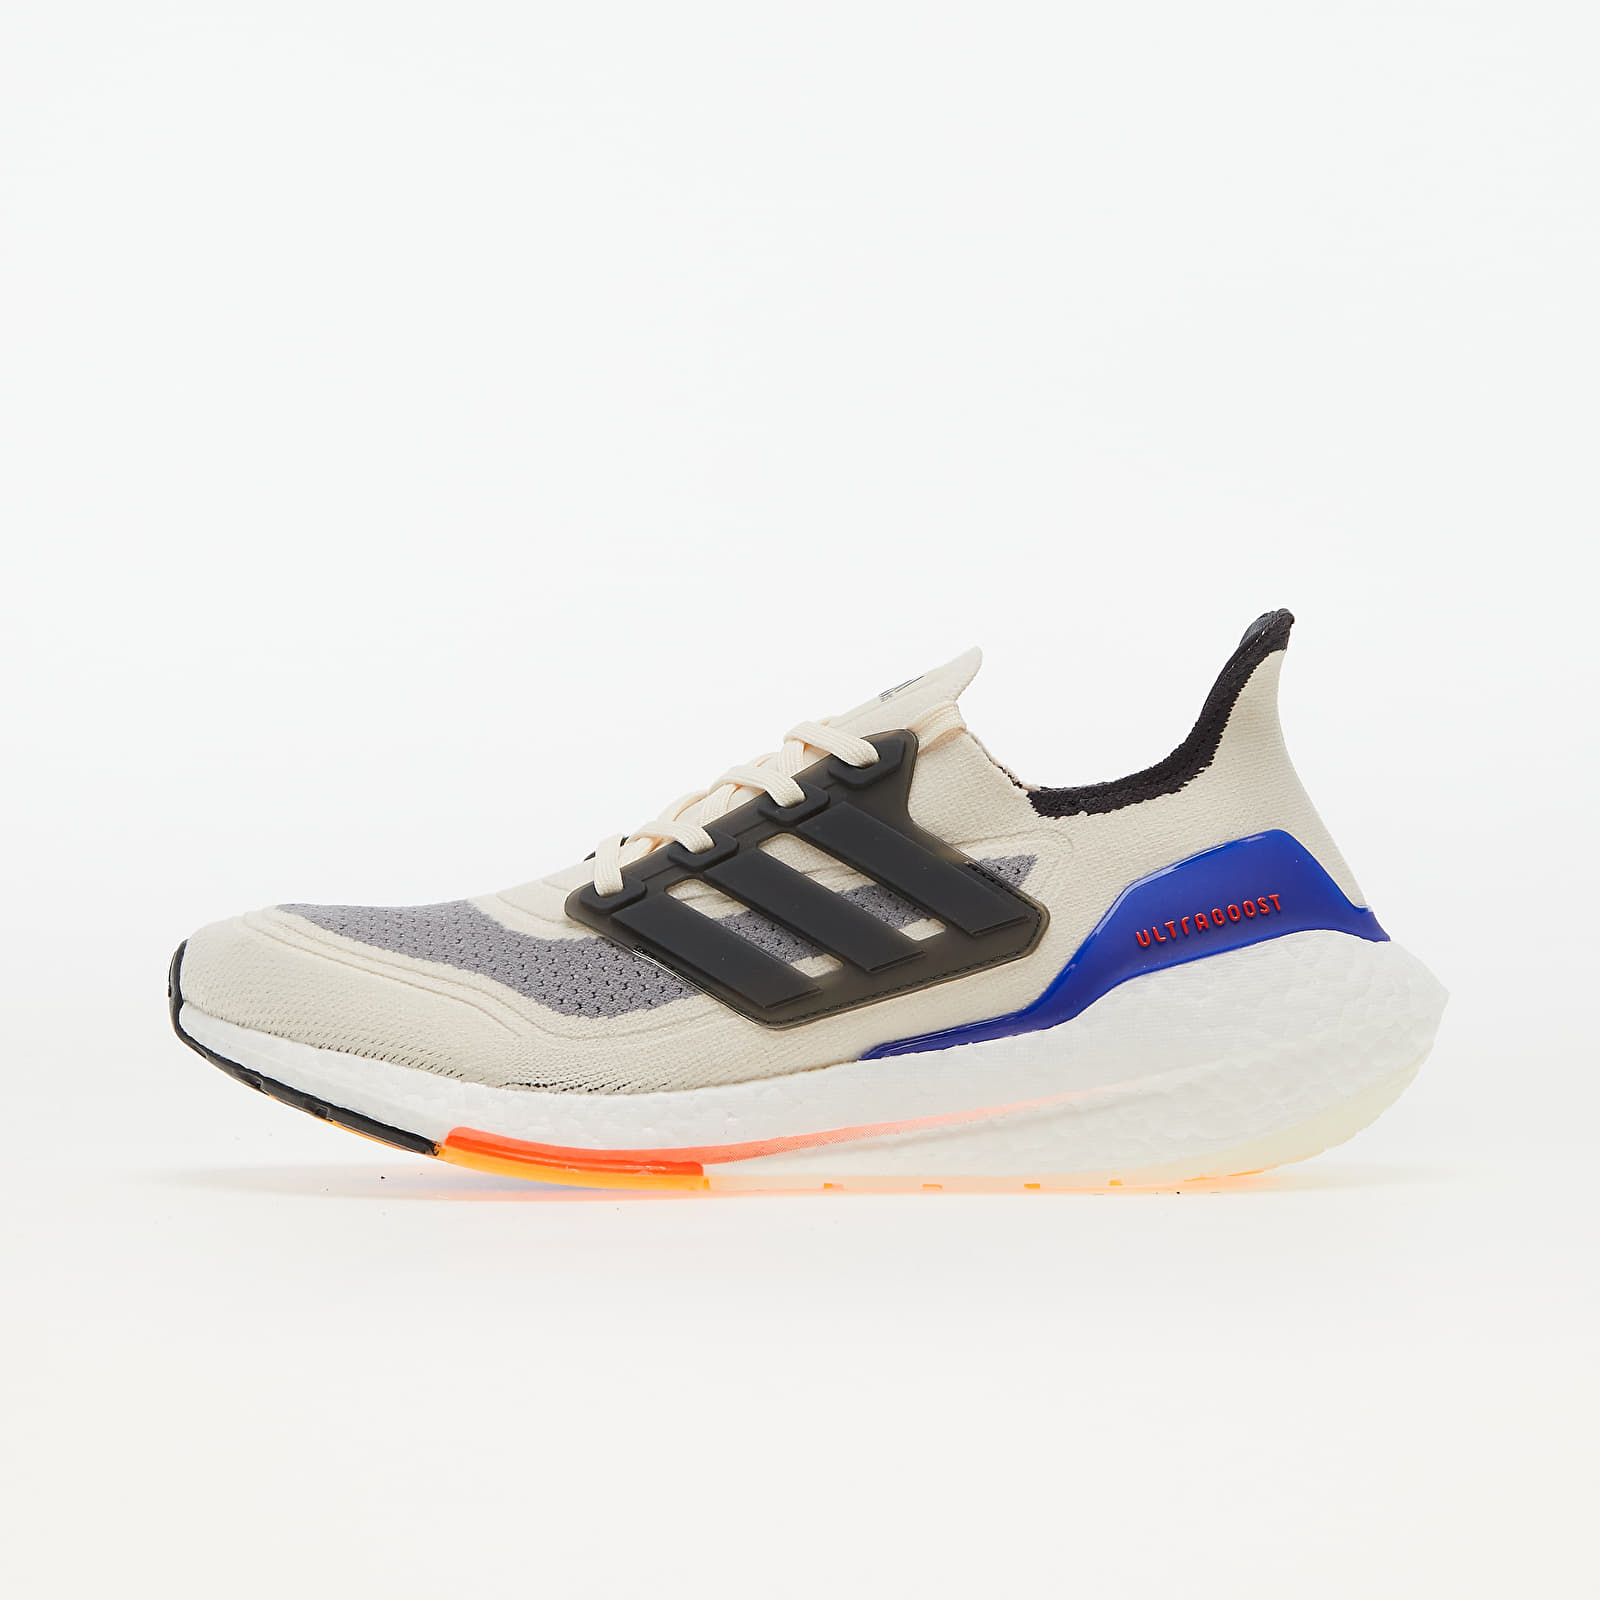 Chaussures et baskets homme adidas UltraBOOST 21 Worn White/ Carbon/ Solar Red